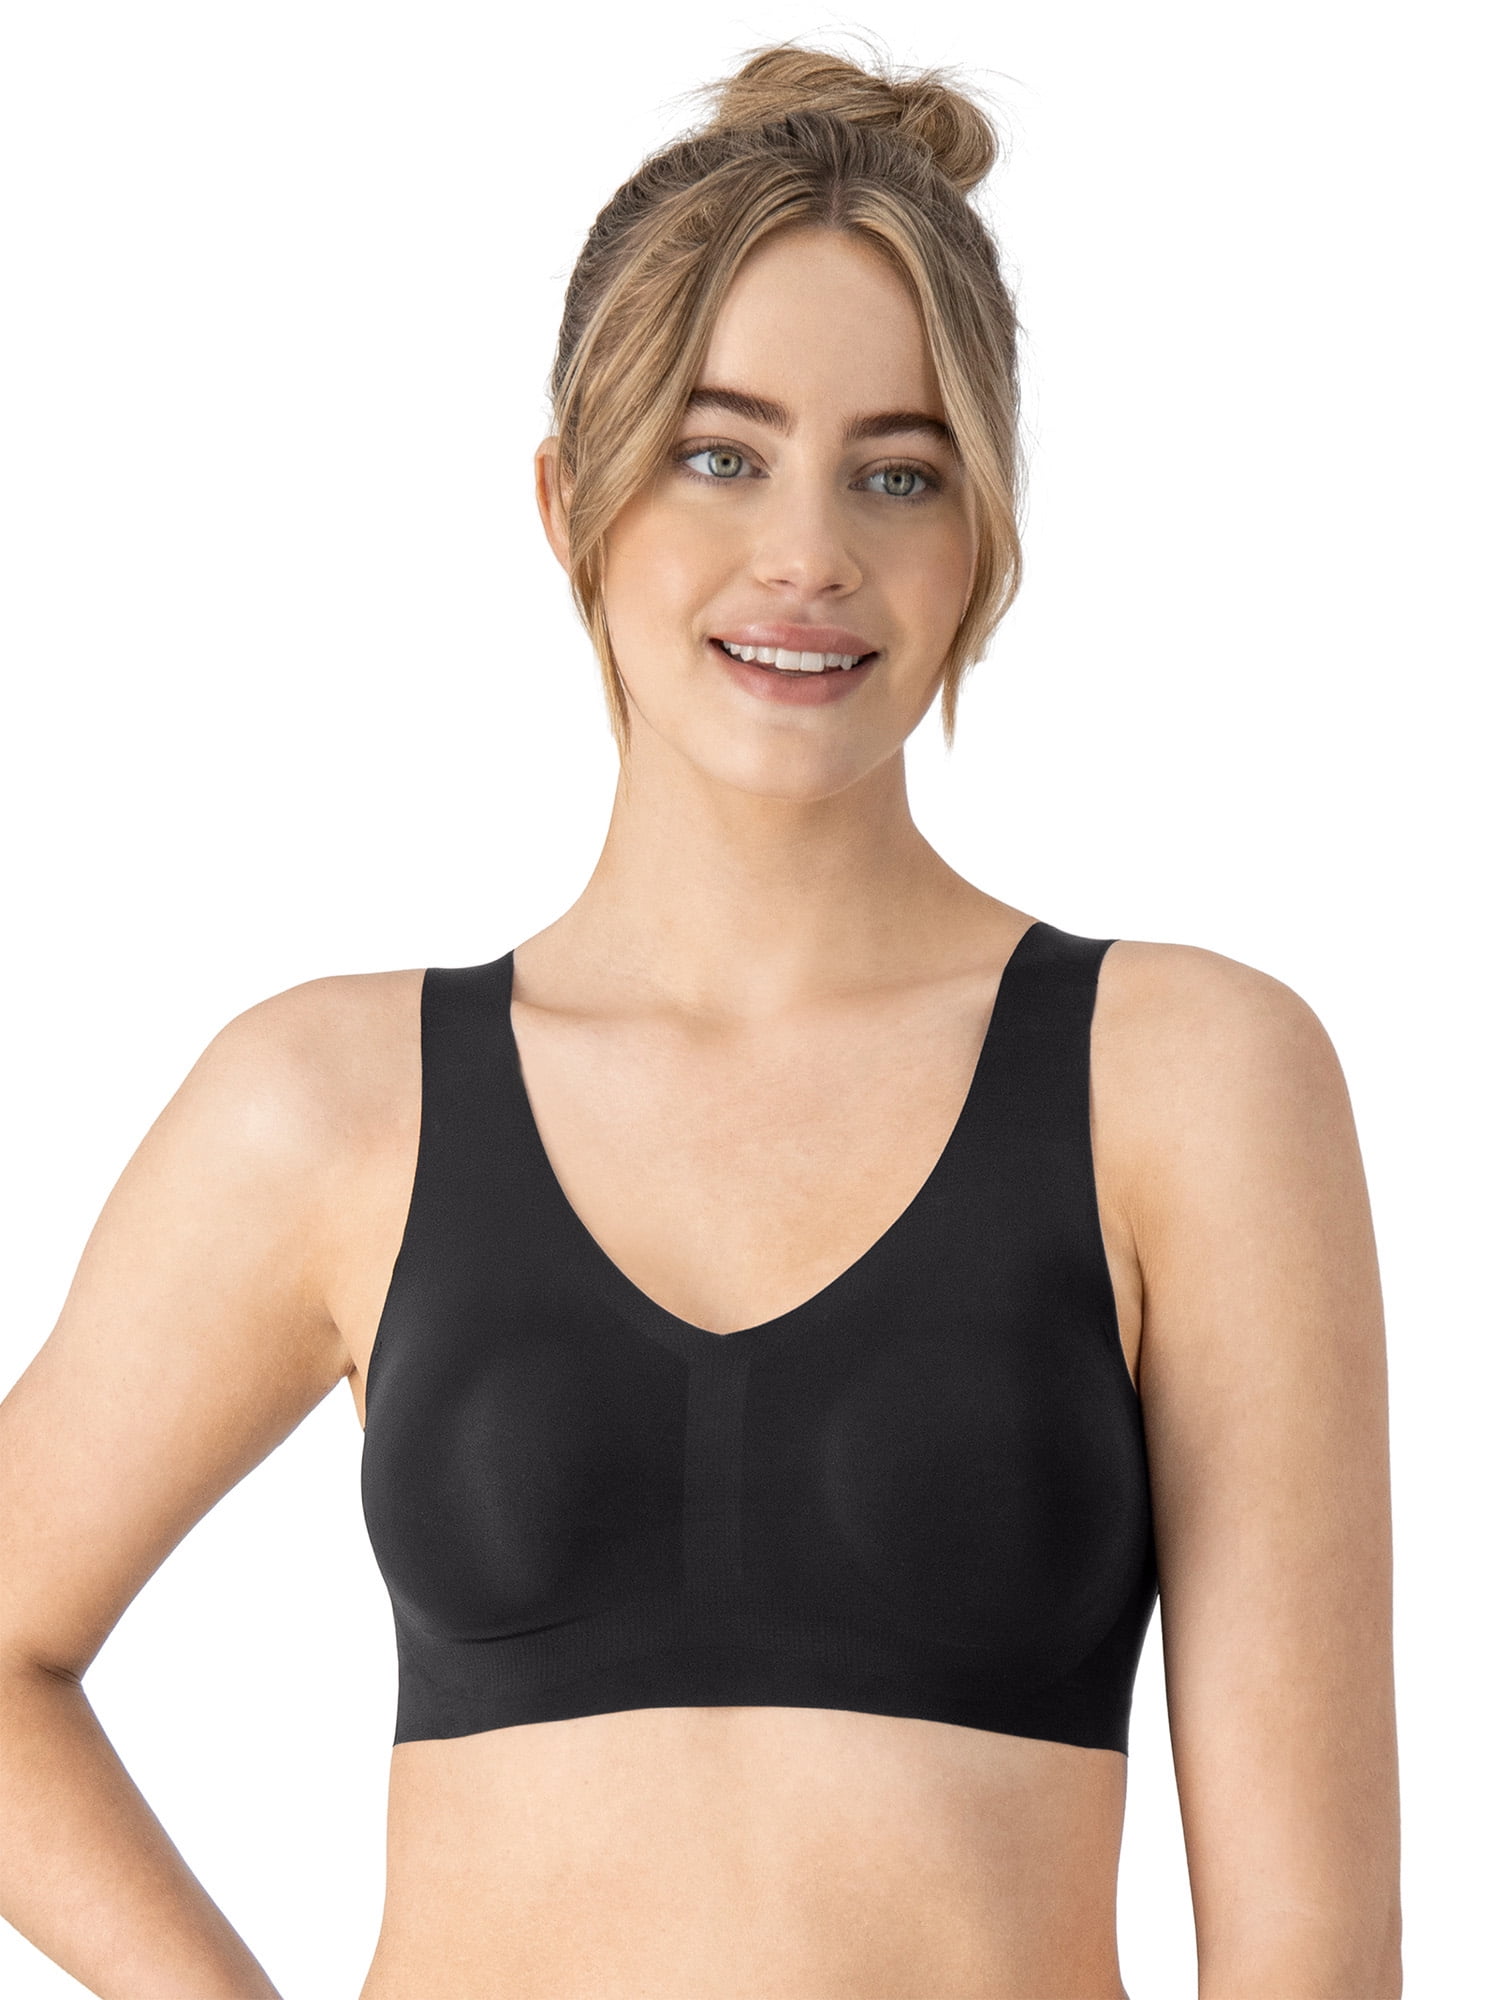 HanesBrands Inc. - HANESBRANDS EXTENDS SUCCESSFUL DREAMWIRE BRA INNOVATION  TO BALI BRAND TO ADDRESS CONSUMERS' TOP BRA COMPLAINTS